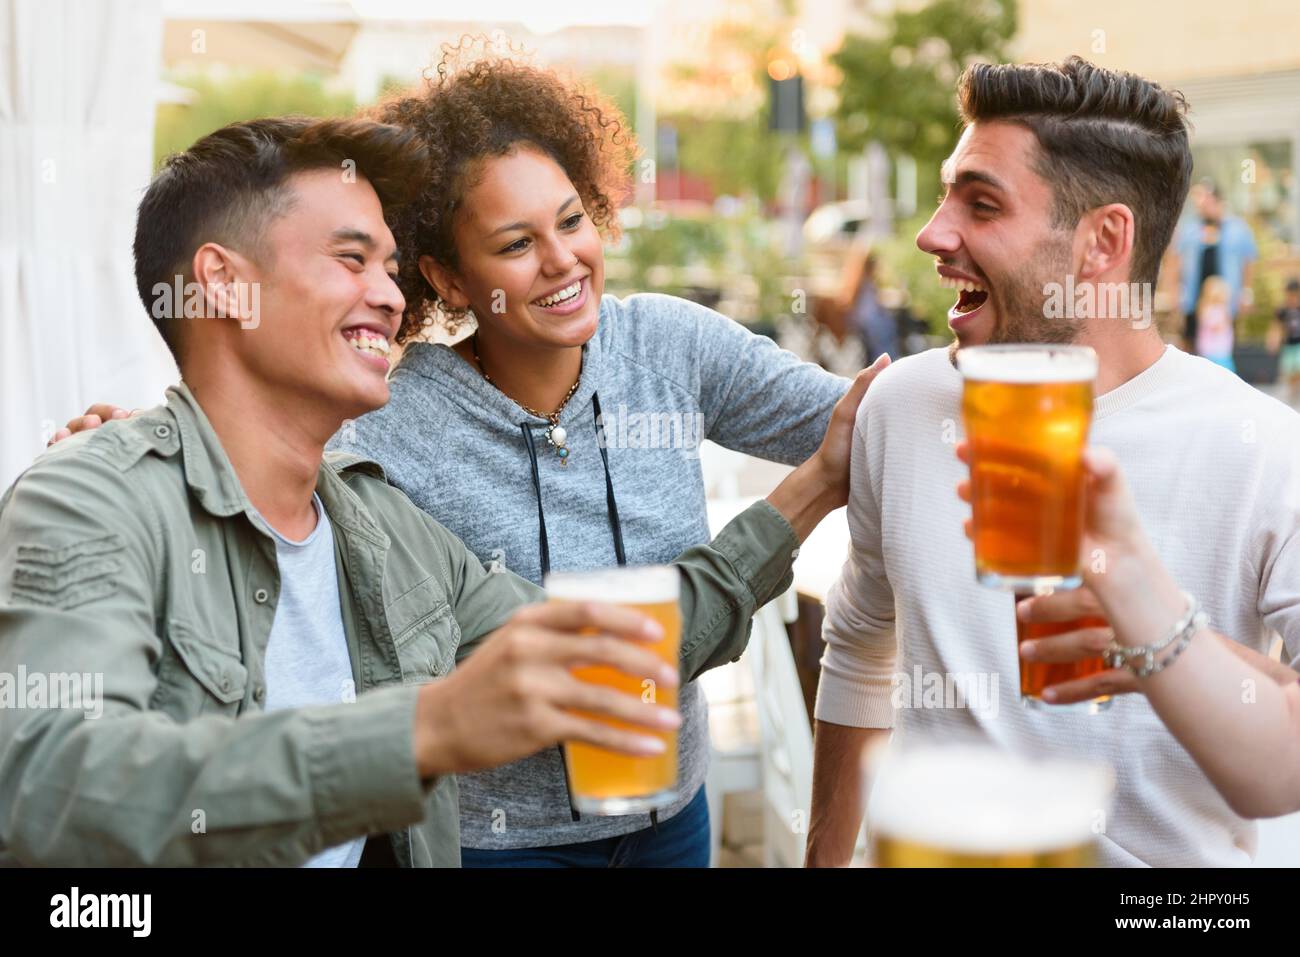 Group of cheerful multiracial friends looking at each other while drinking alcoholic beer on terrace of outdoor cafe in city Stock Photo